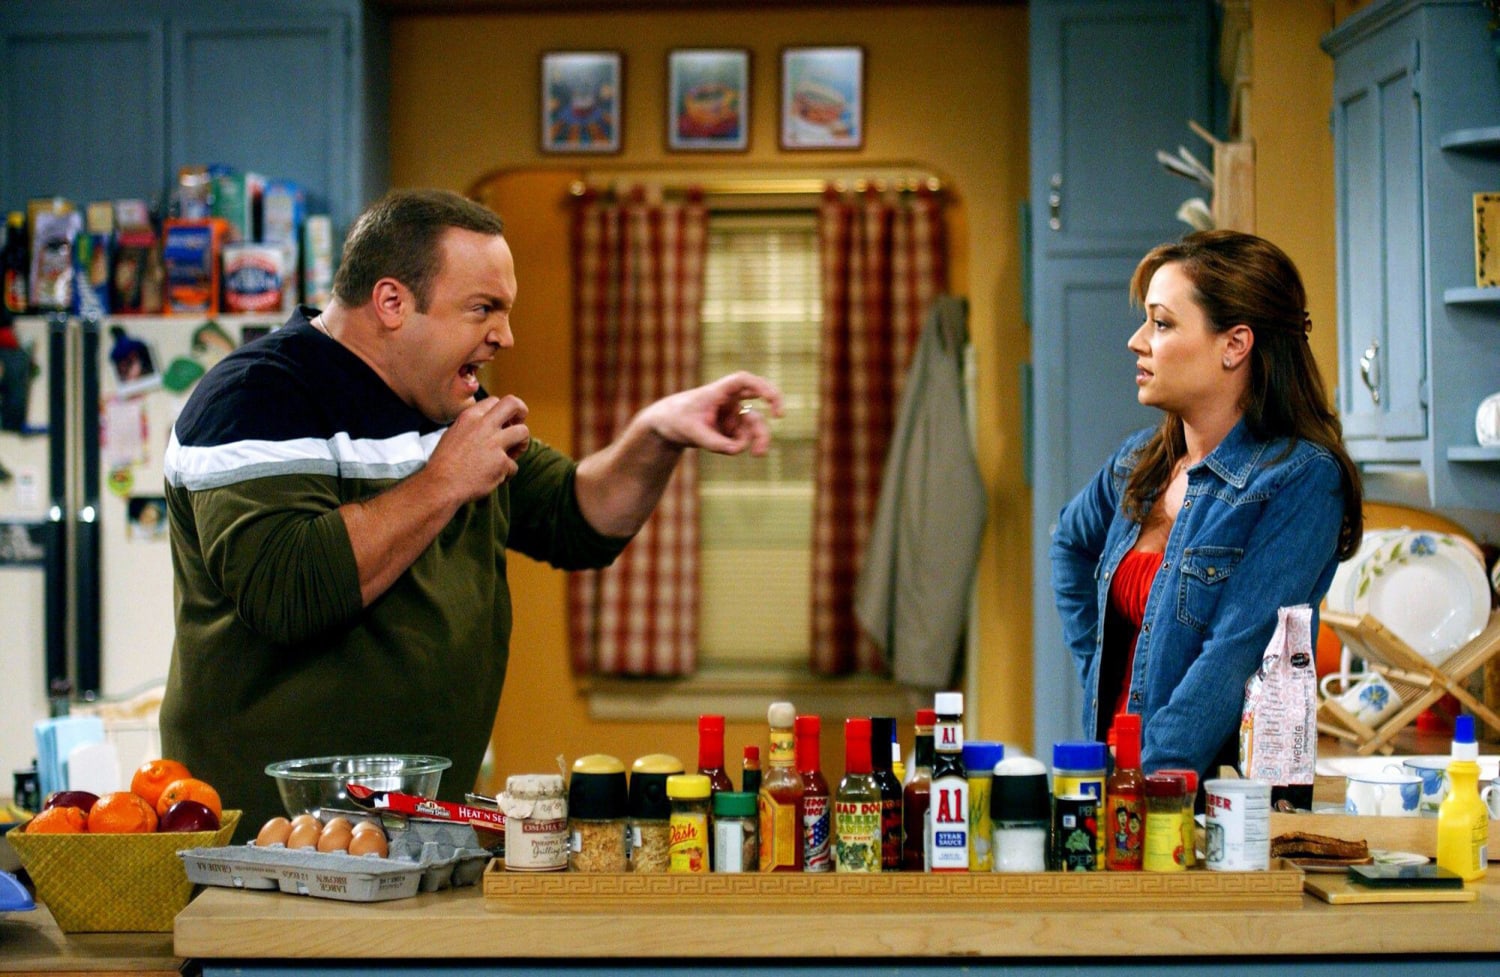 The King of Queens' 25th anniversary: The cast then and now